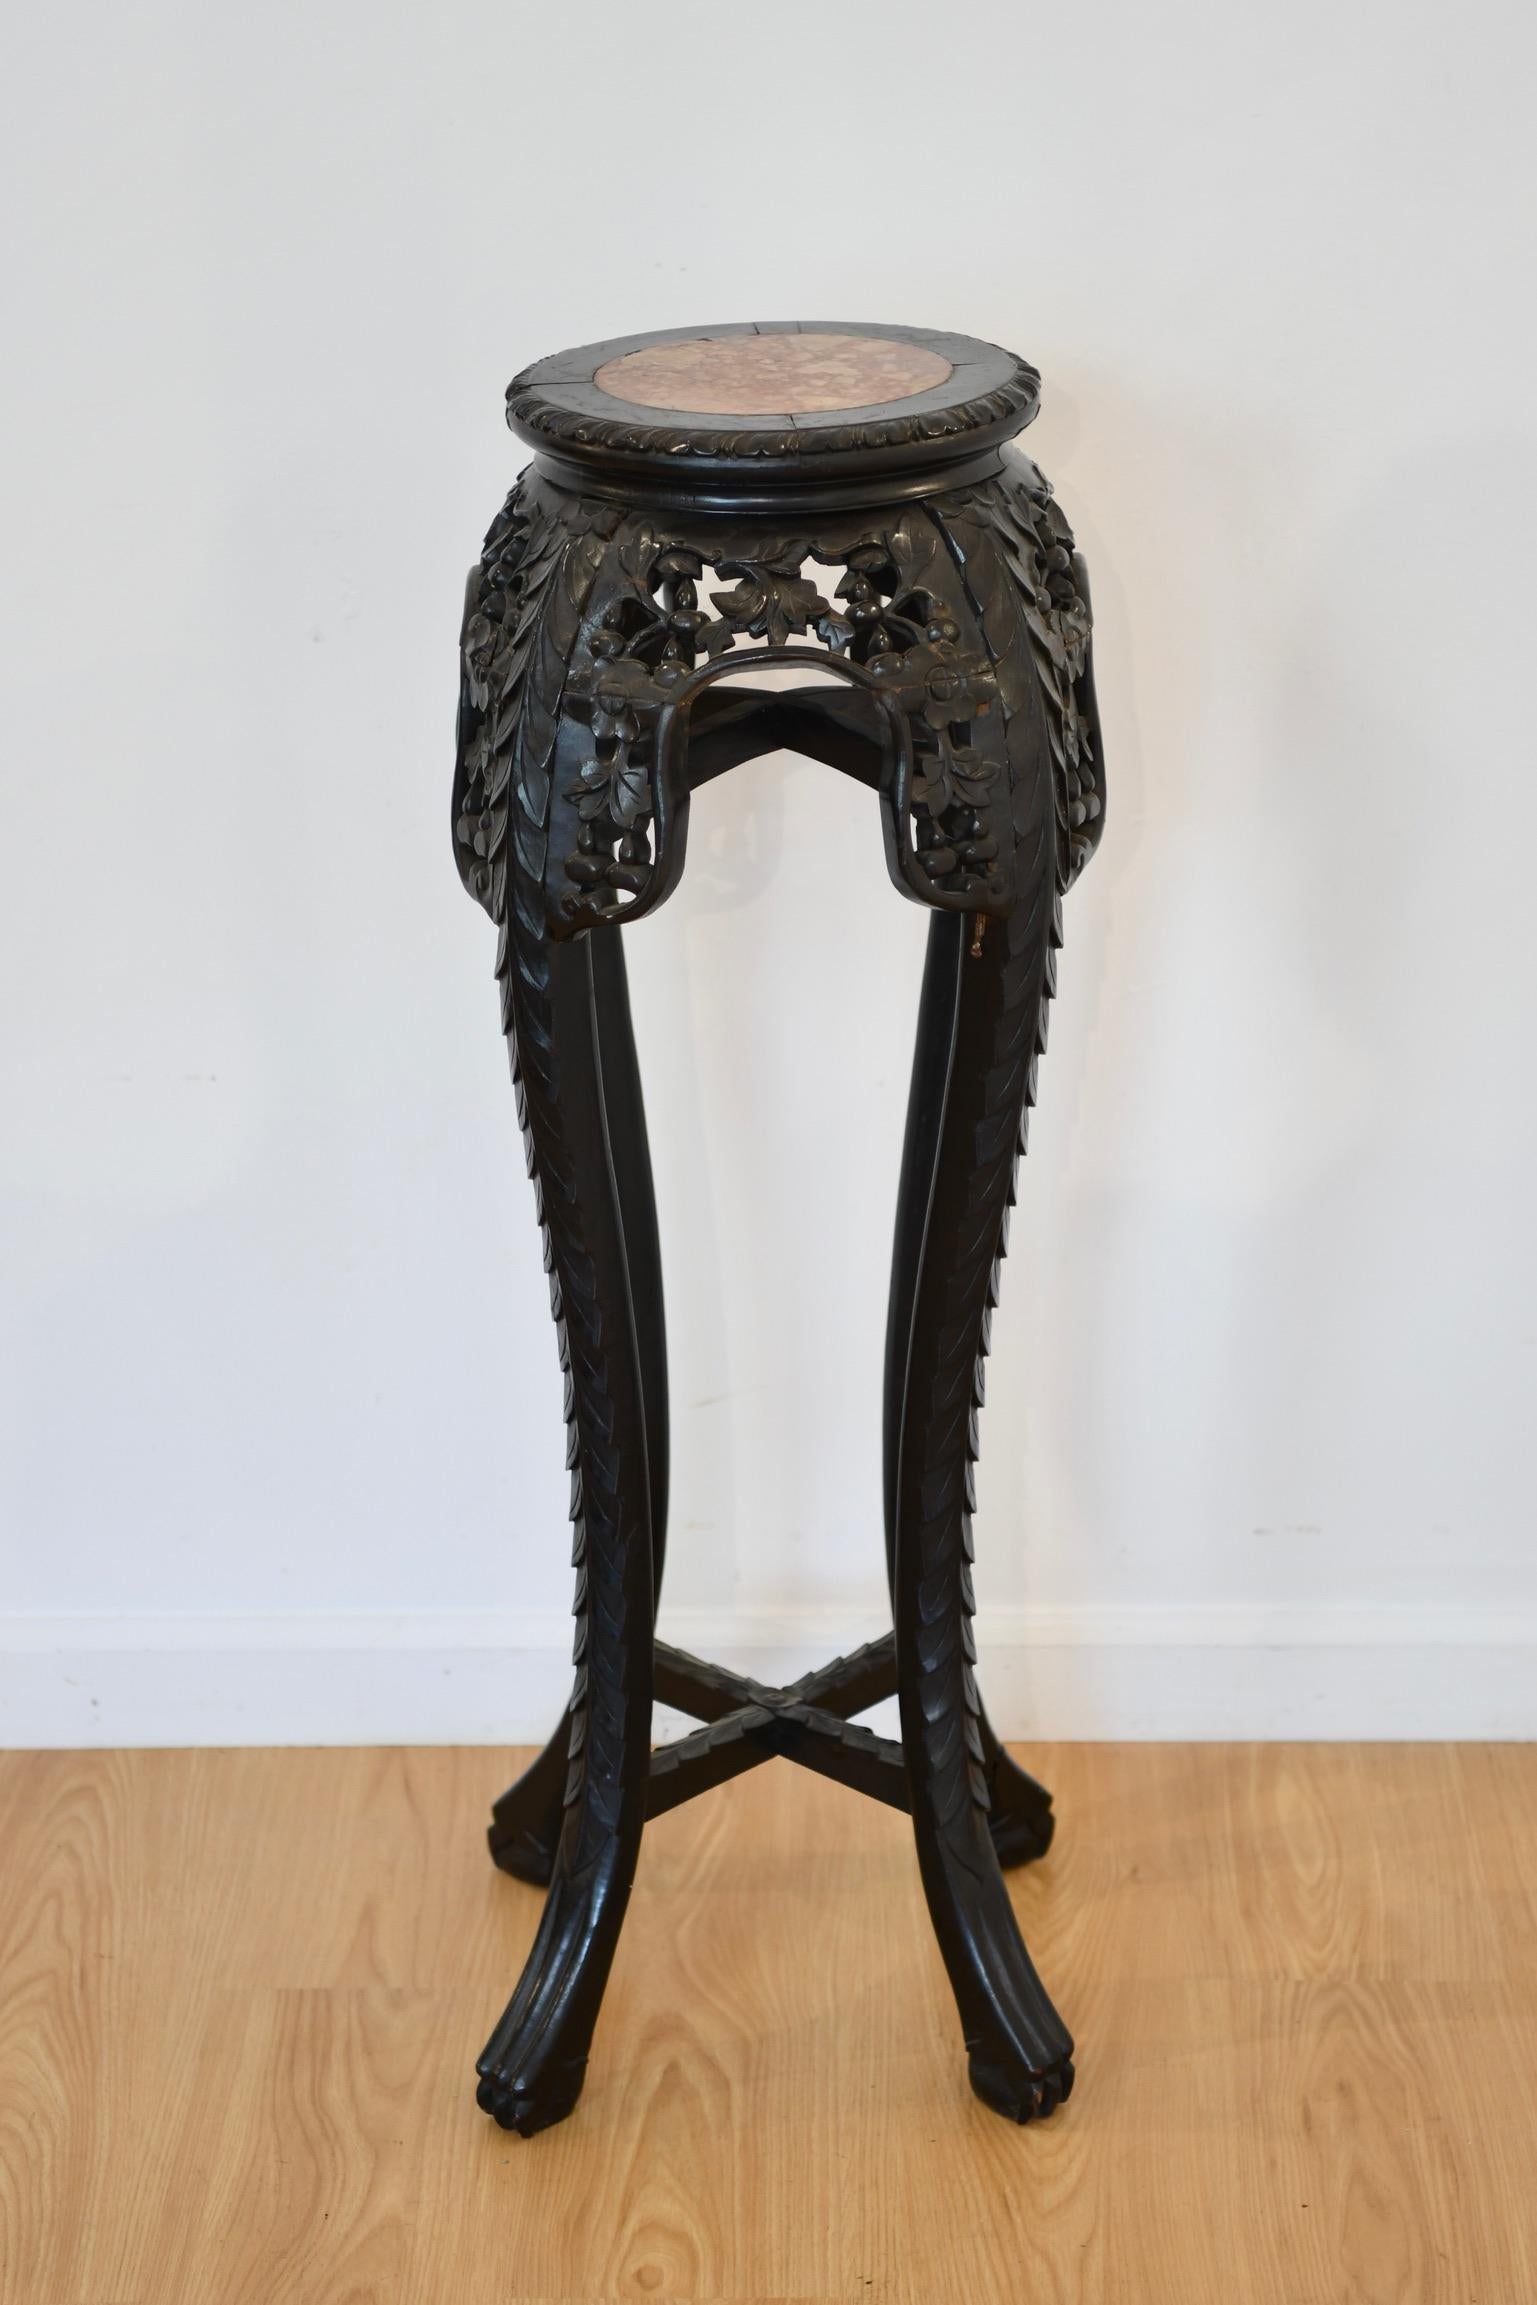 Antique Asian wood stand with marble inlay. Dimensions: 36.25